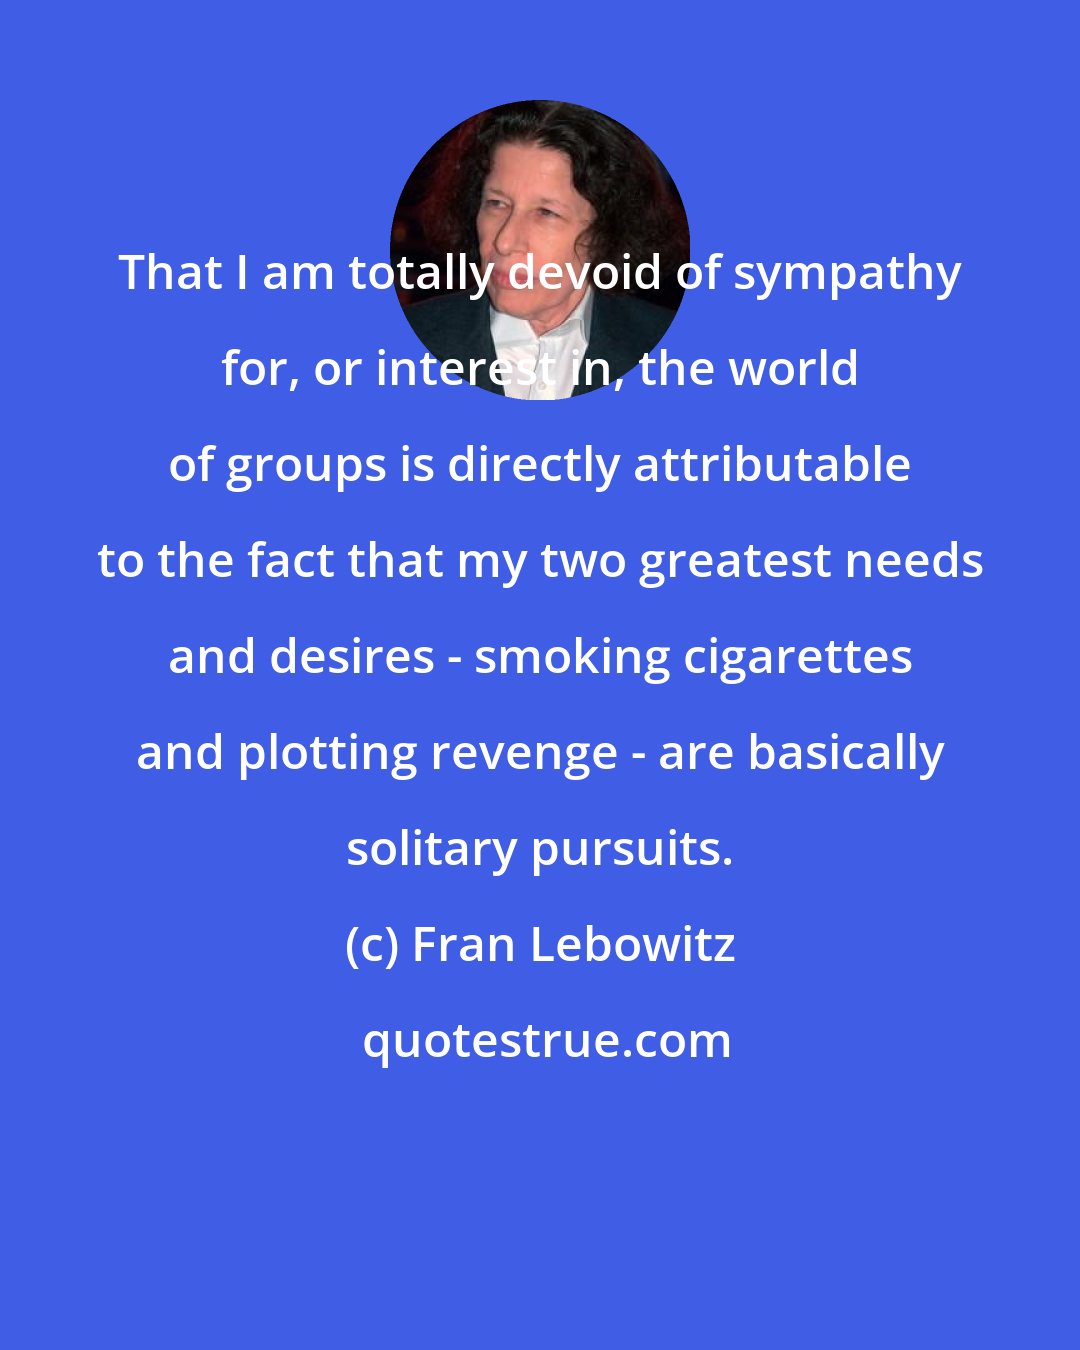 Fran Lebowitz: That I am totally devoid of sympathy for, or interest in, the world of groups is directly attributable to the fact that my two greatest needs and desires - smoking cigarettes and plotting revenge - are basically solitary pursuits.